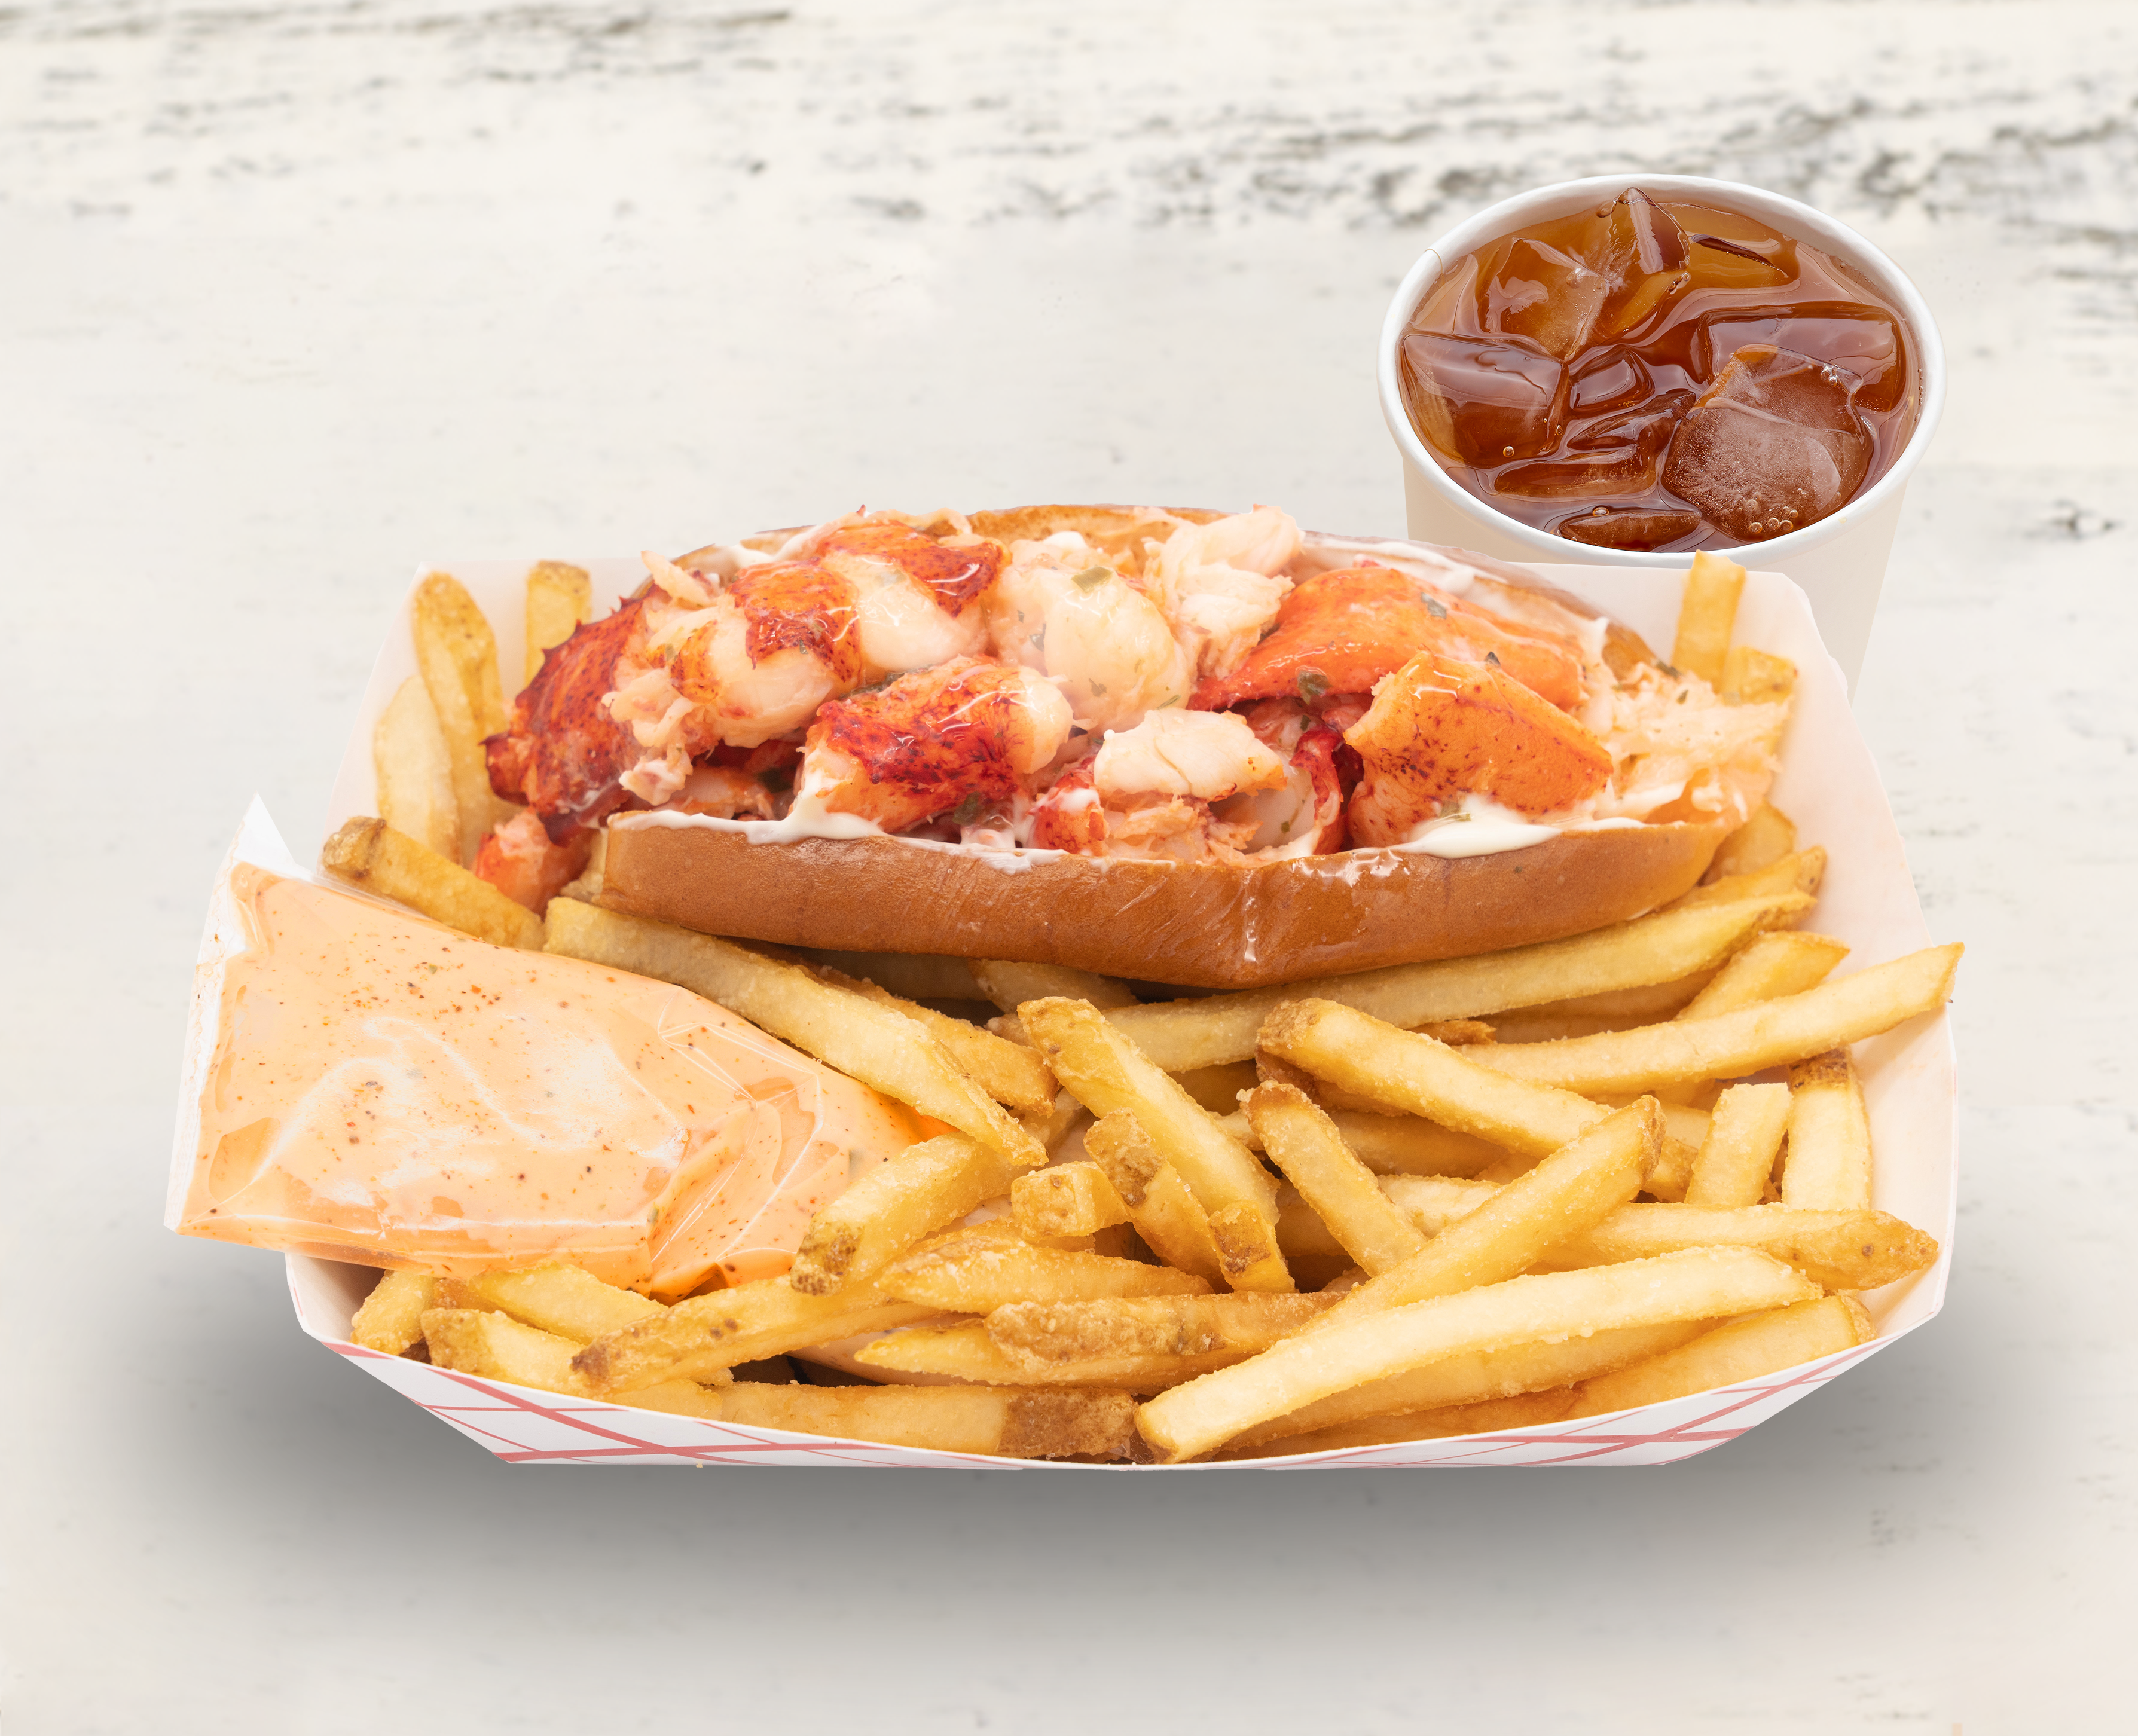 Image for #3 Chilled Lobster Roll with Mayo and Seasoned Lemon Butter